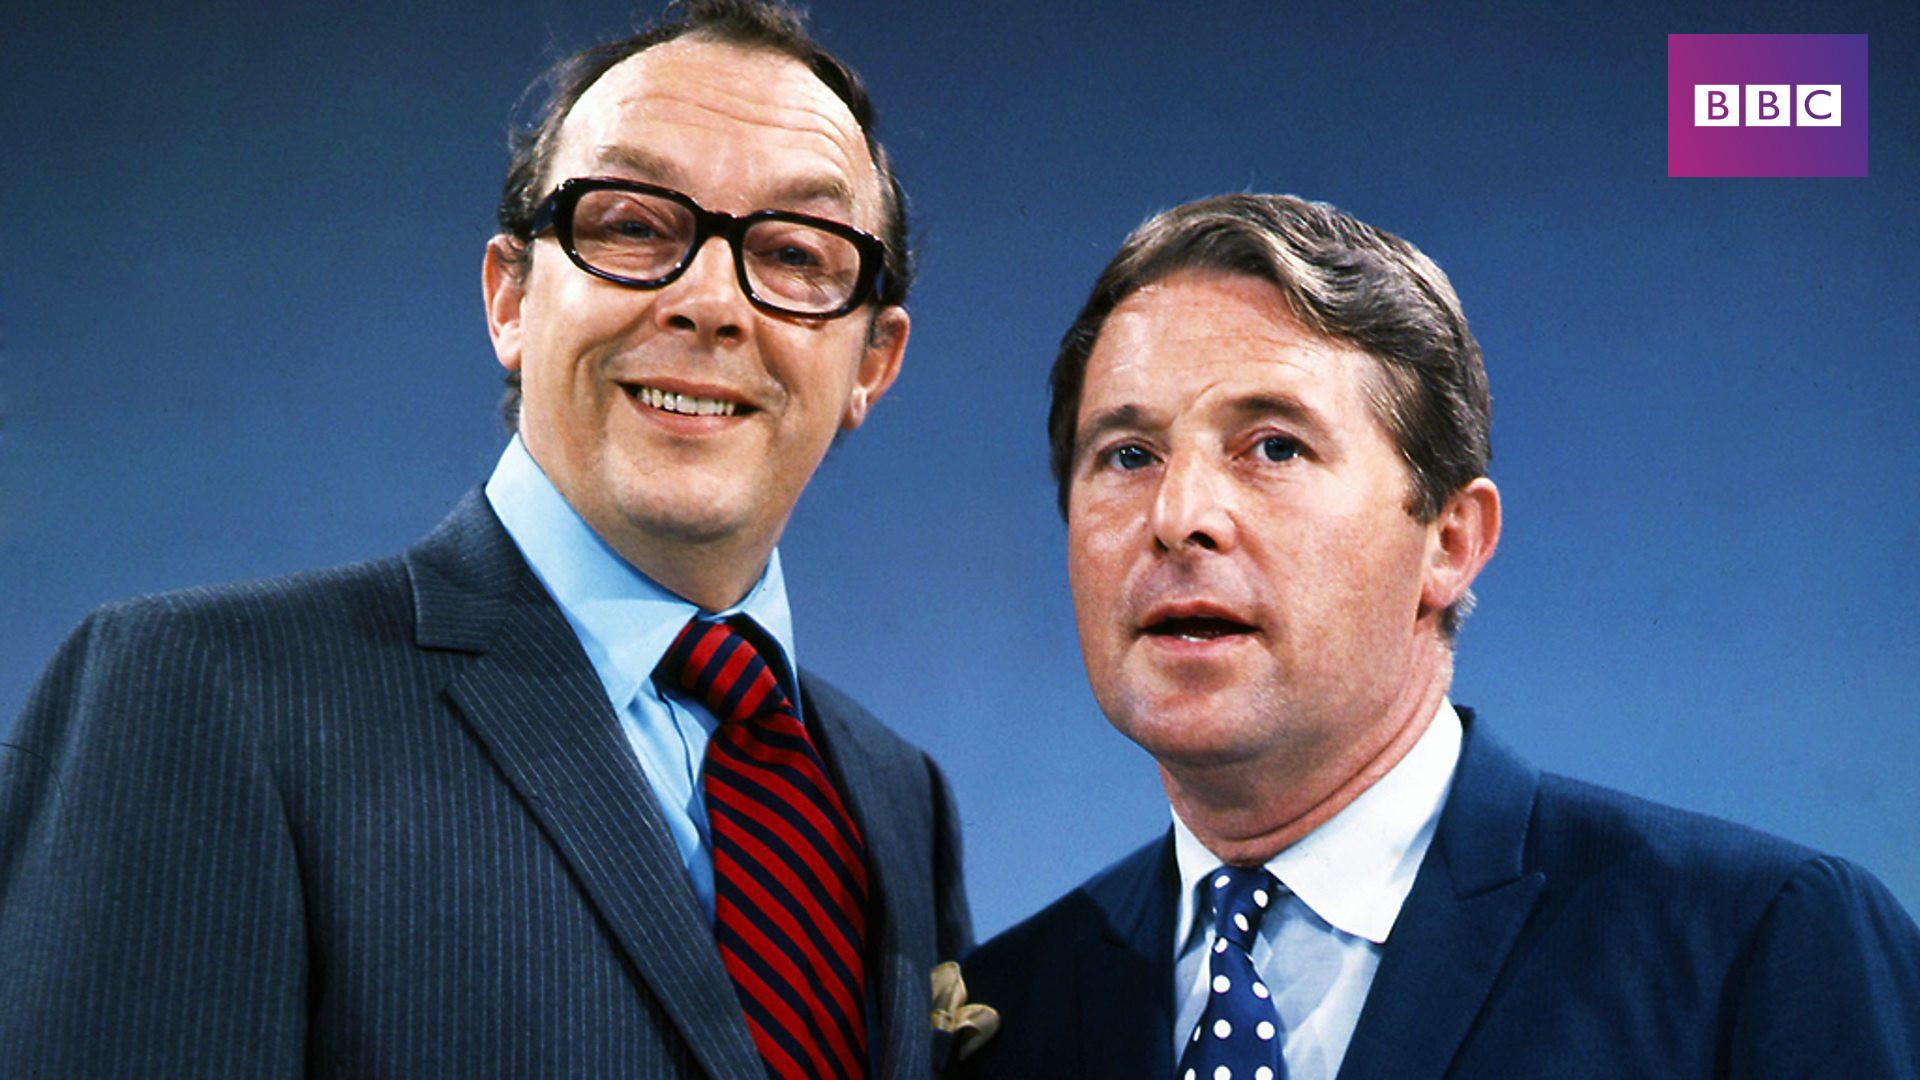 The Morecambe and Wise Show (1968)